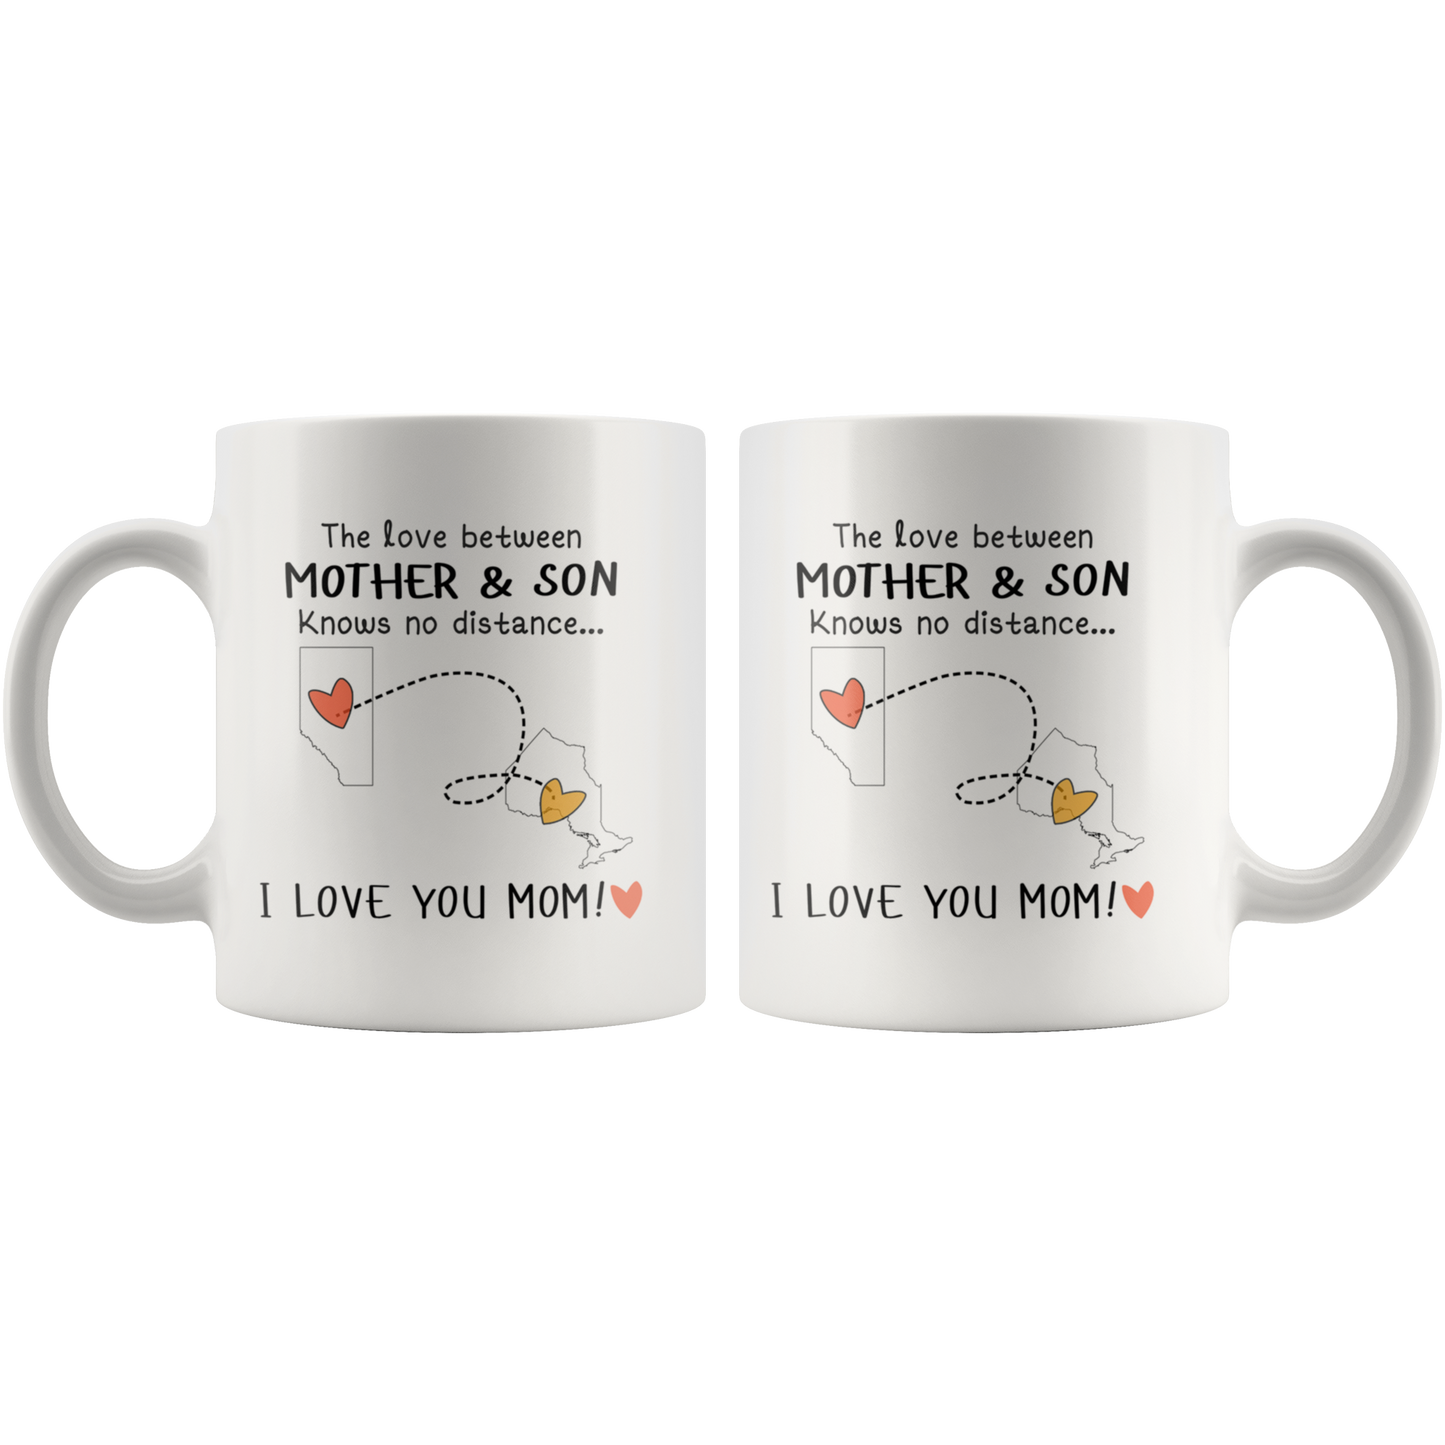 MUG0120547161-sp-24203 - [ Alberta | Ontario ]Mothers Day Gifts from Son - The Love Between Mother and So